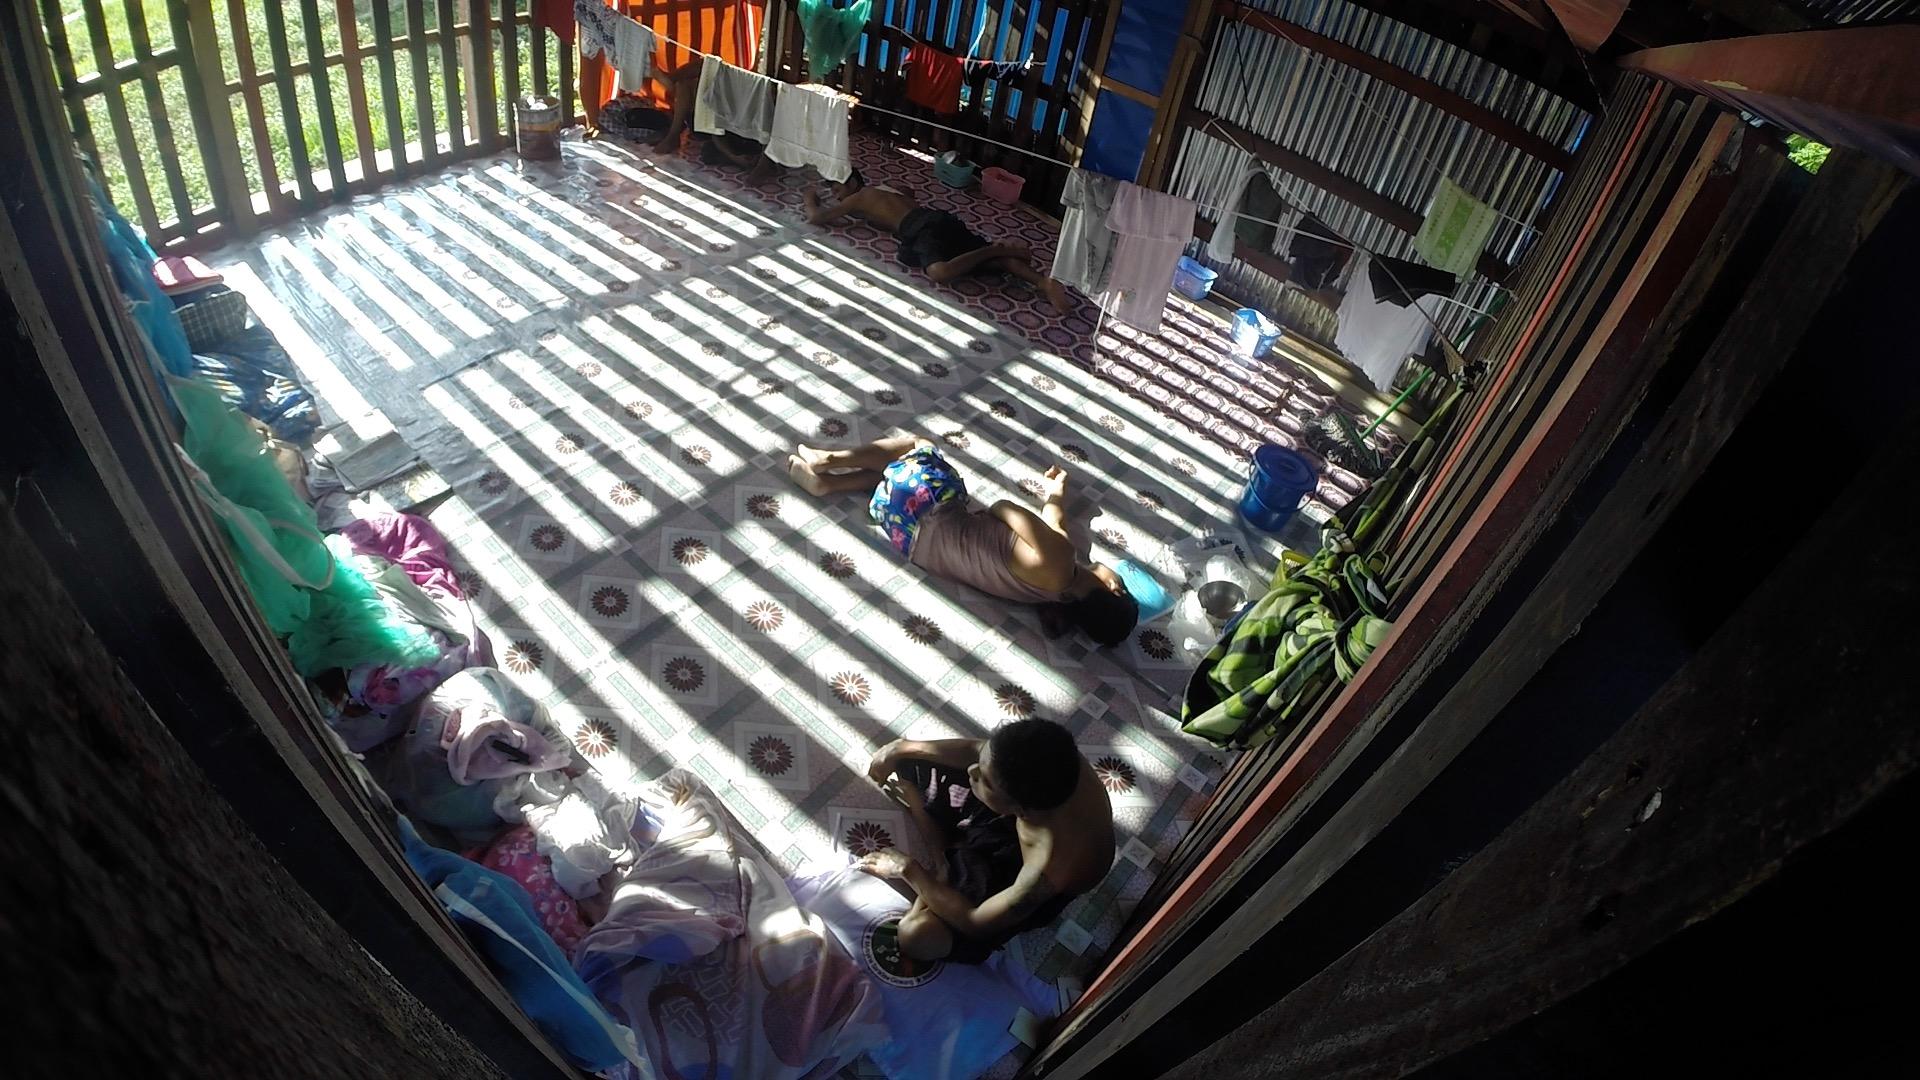 Drug addicts suffering severe withdrawal pains are locked in a barred cell at Rebirth Rehabilitation Center in Myitkyina. These room-sized cages, common at rehab camps in Myanmar's north, prevent addicts from escaping to score more drugs. The Christian-ru